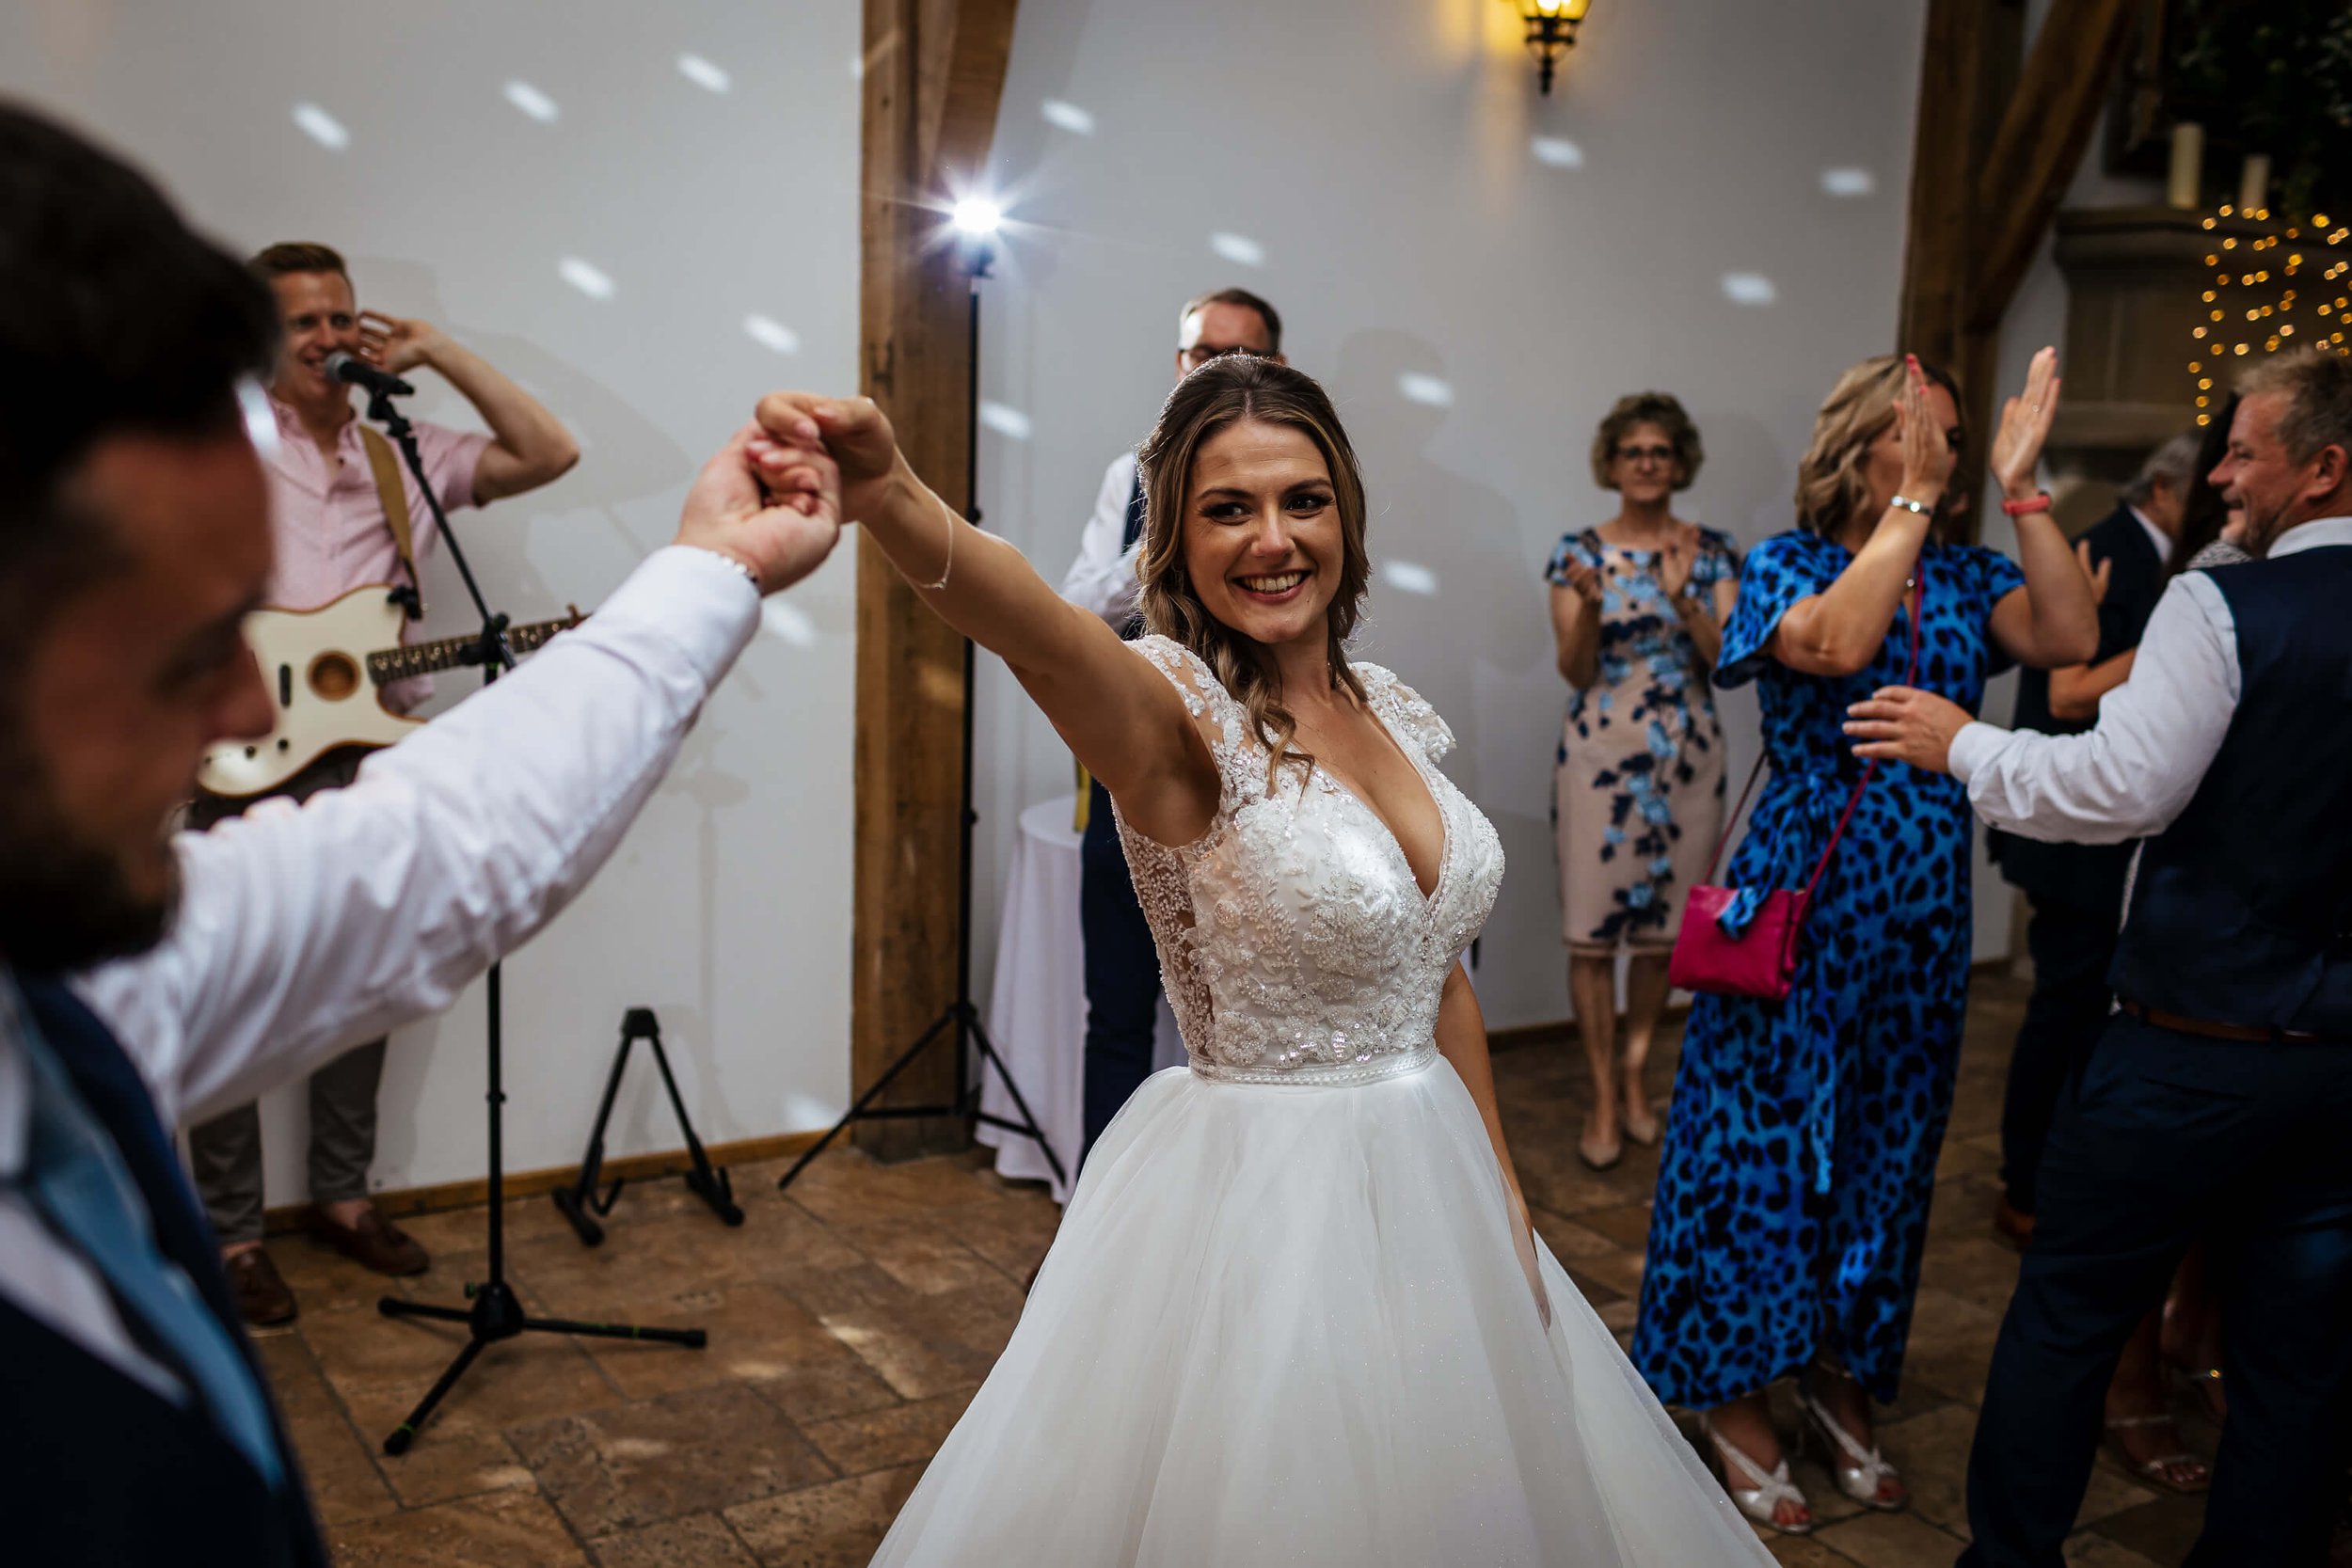 Bride dancing with her groom at a wedding